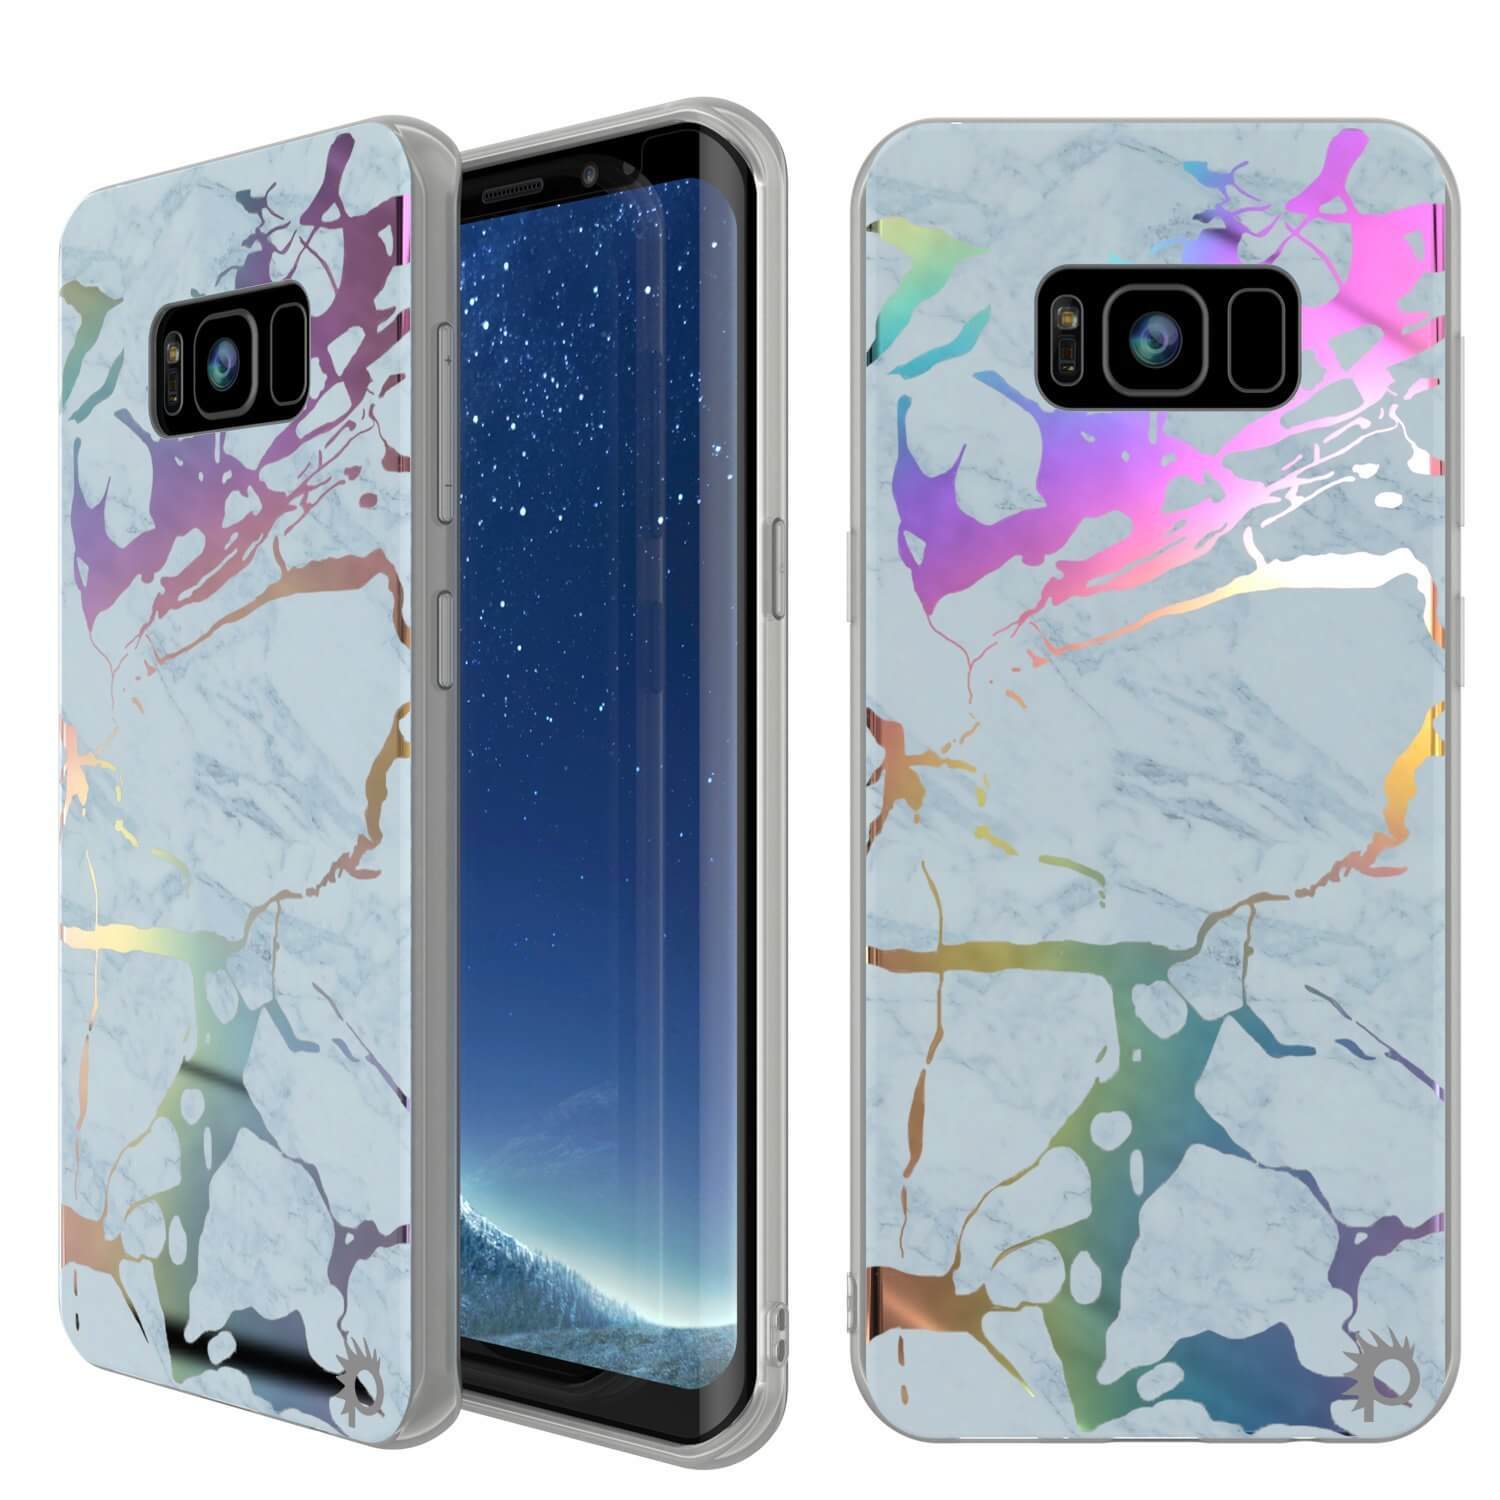 Punkcase Galaxy S8 Marble Case, Protective Full Body Cover W/PunkShield Screen Protector (Blue Marmo)